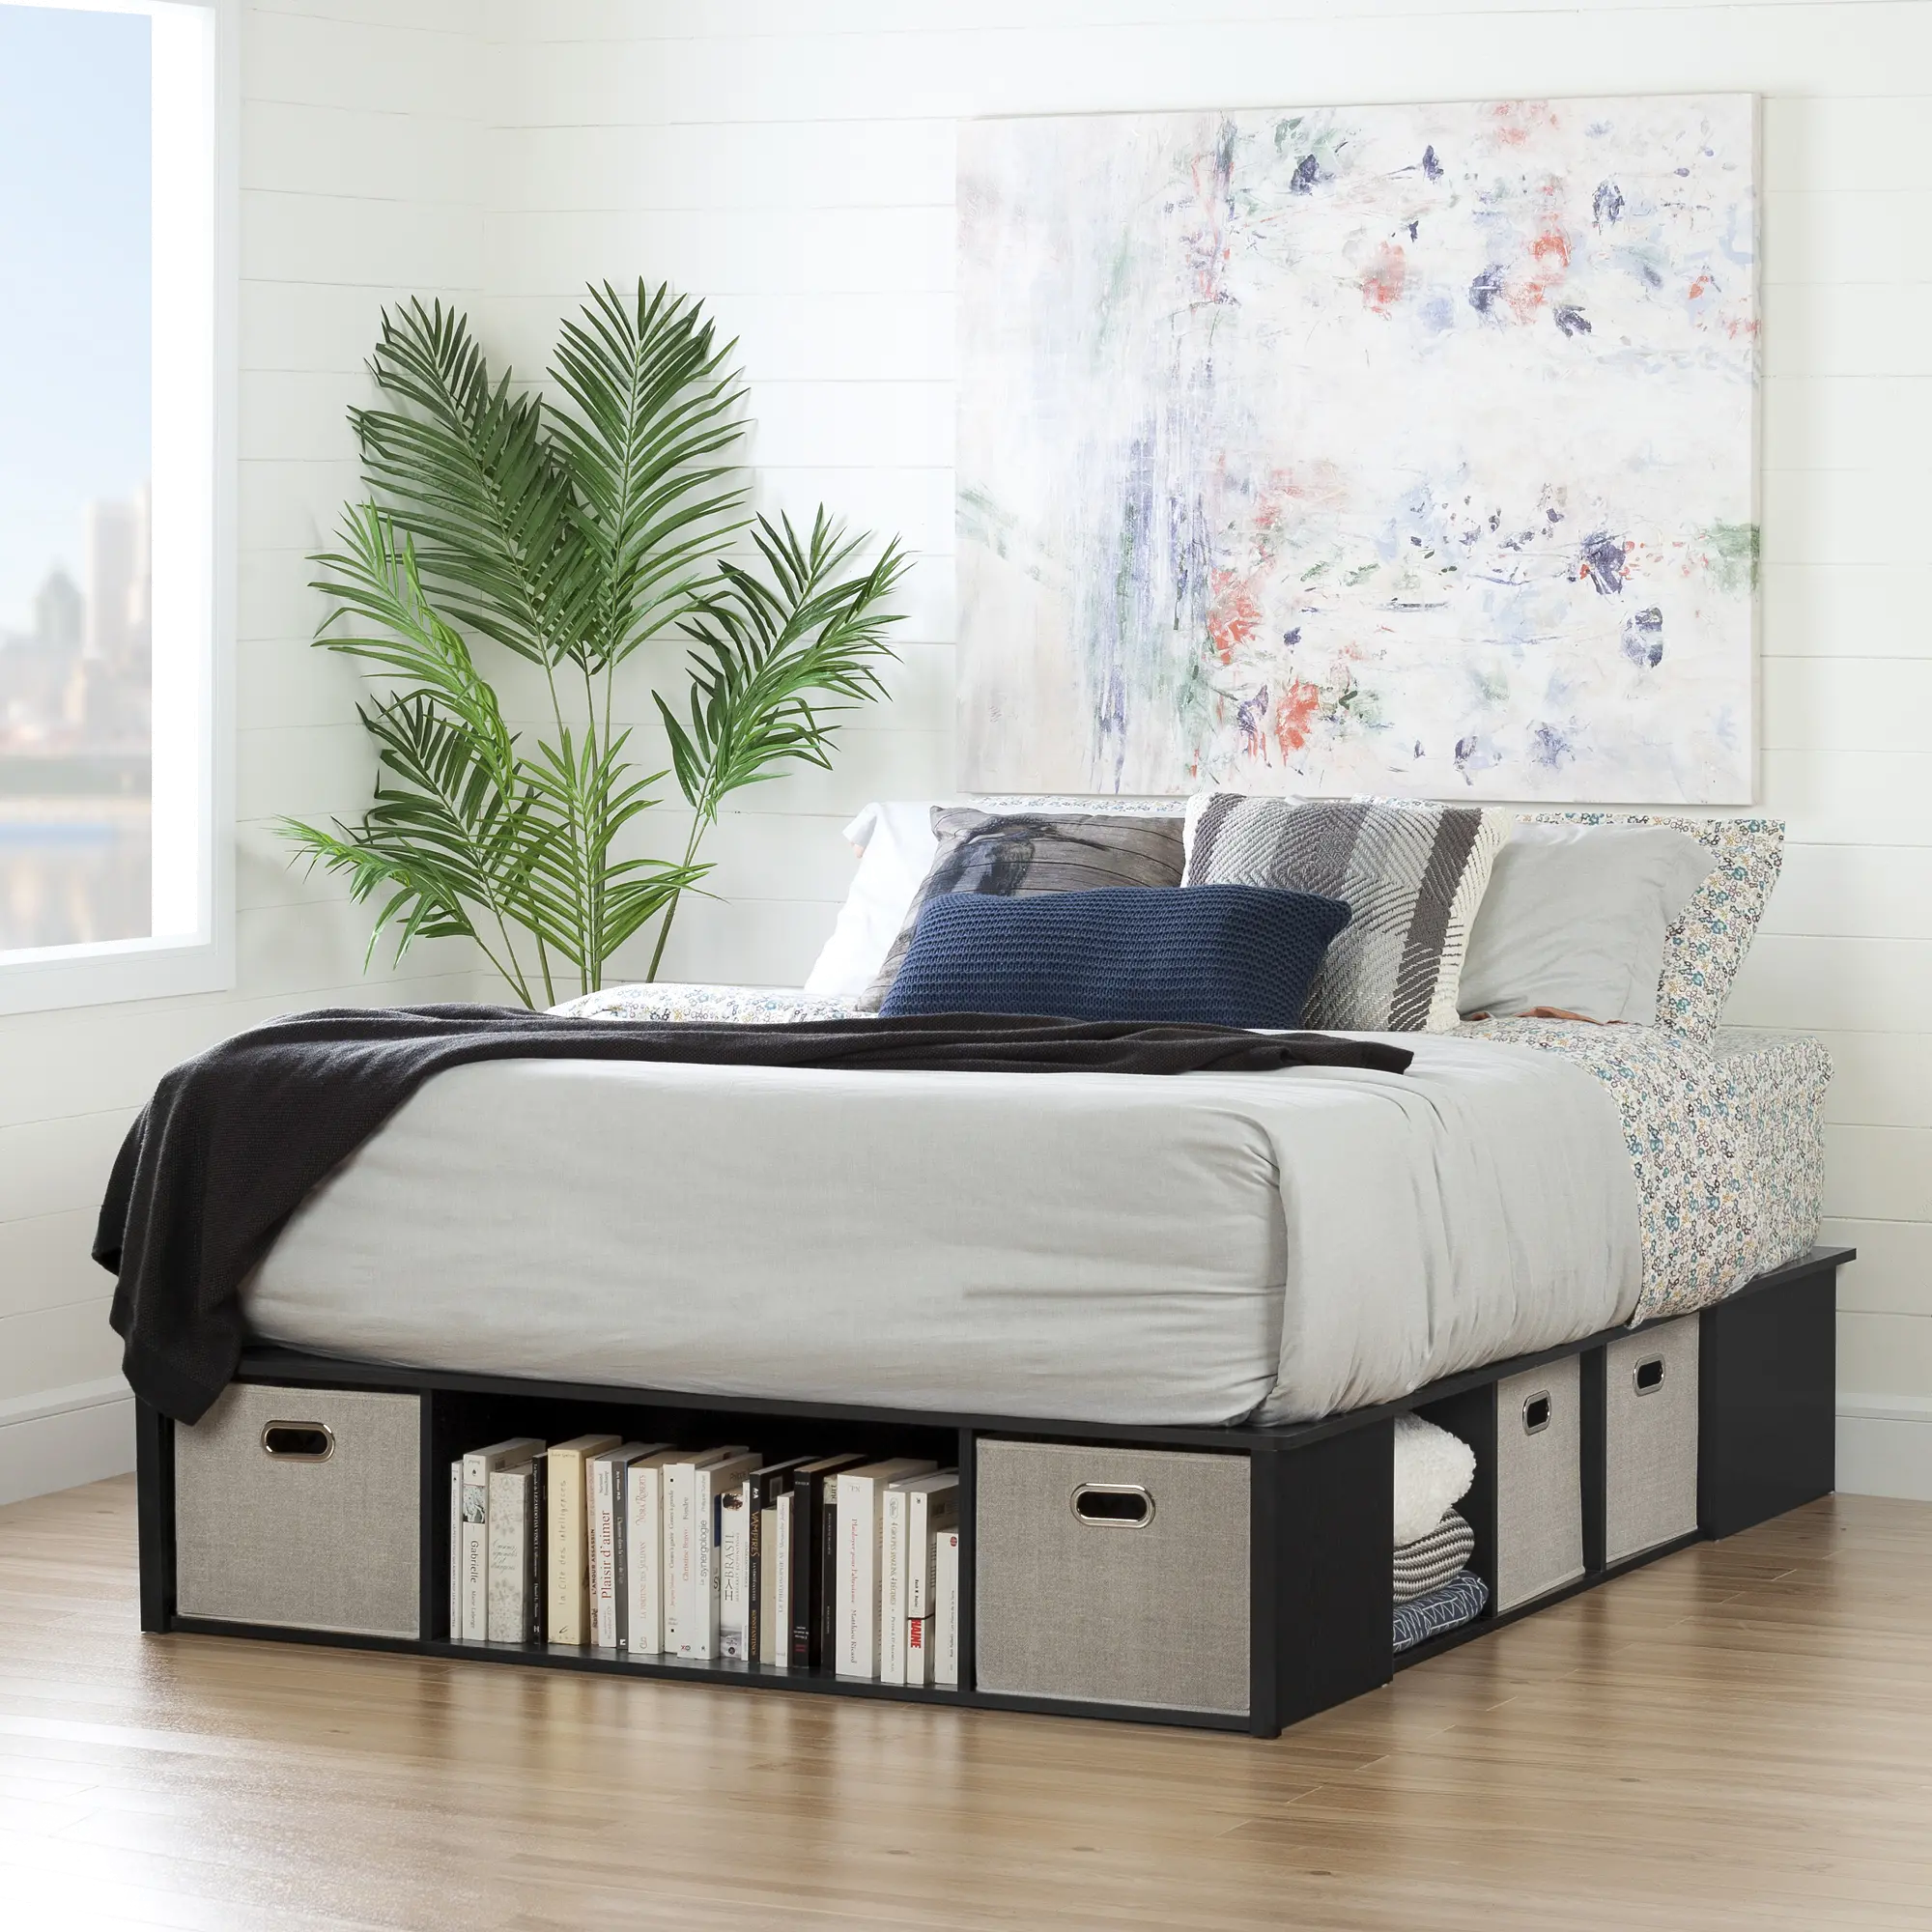 Black Oak Queen Platform Bed with Storage and Baskets - South Shore